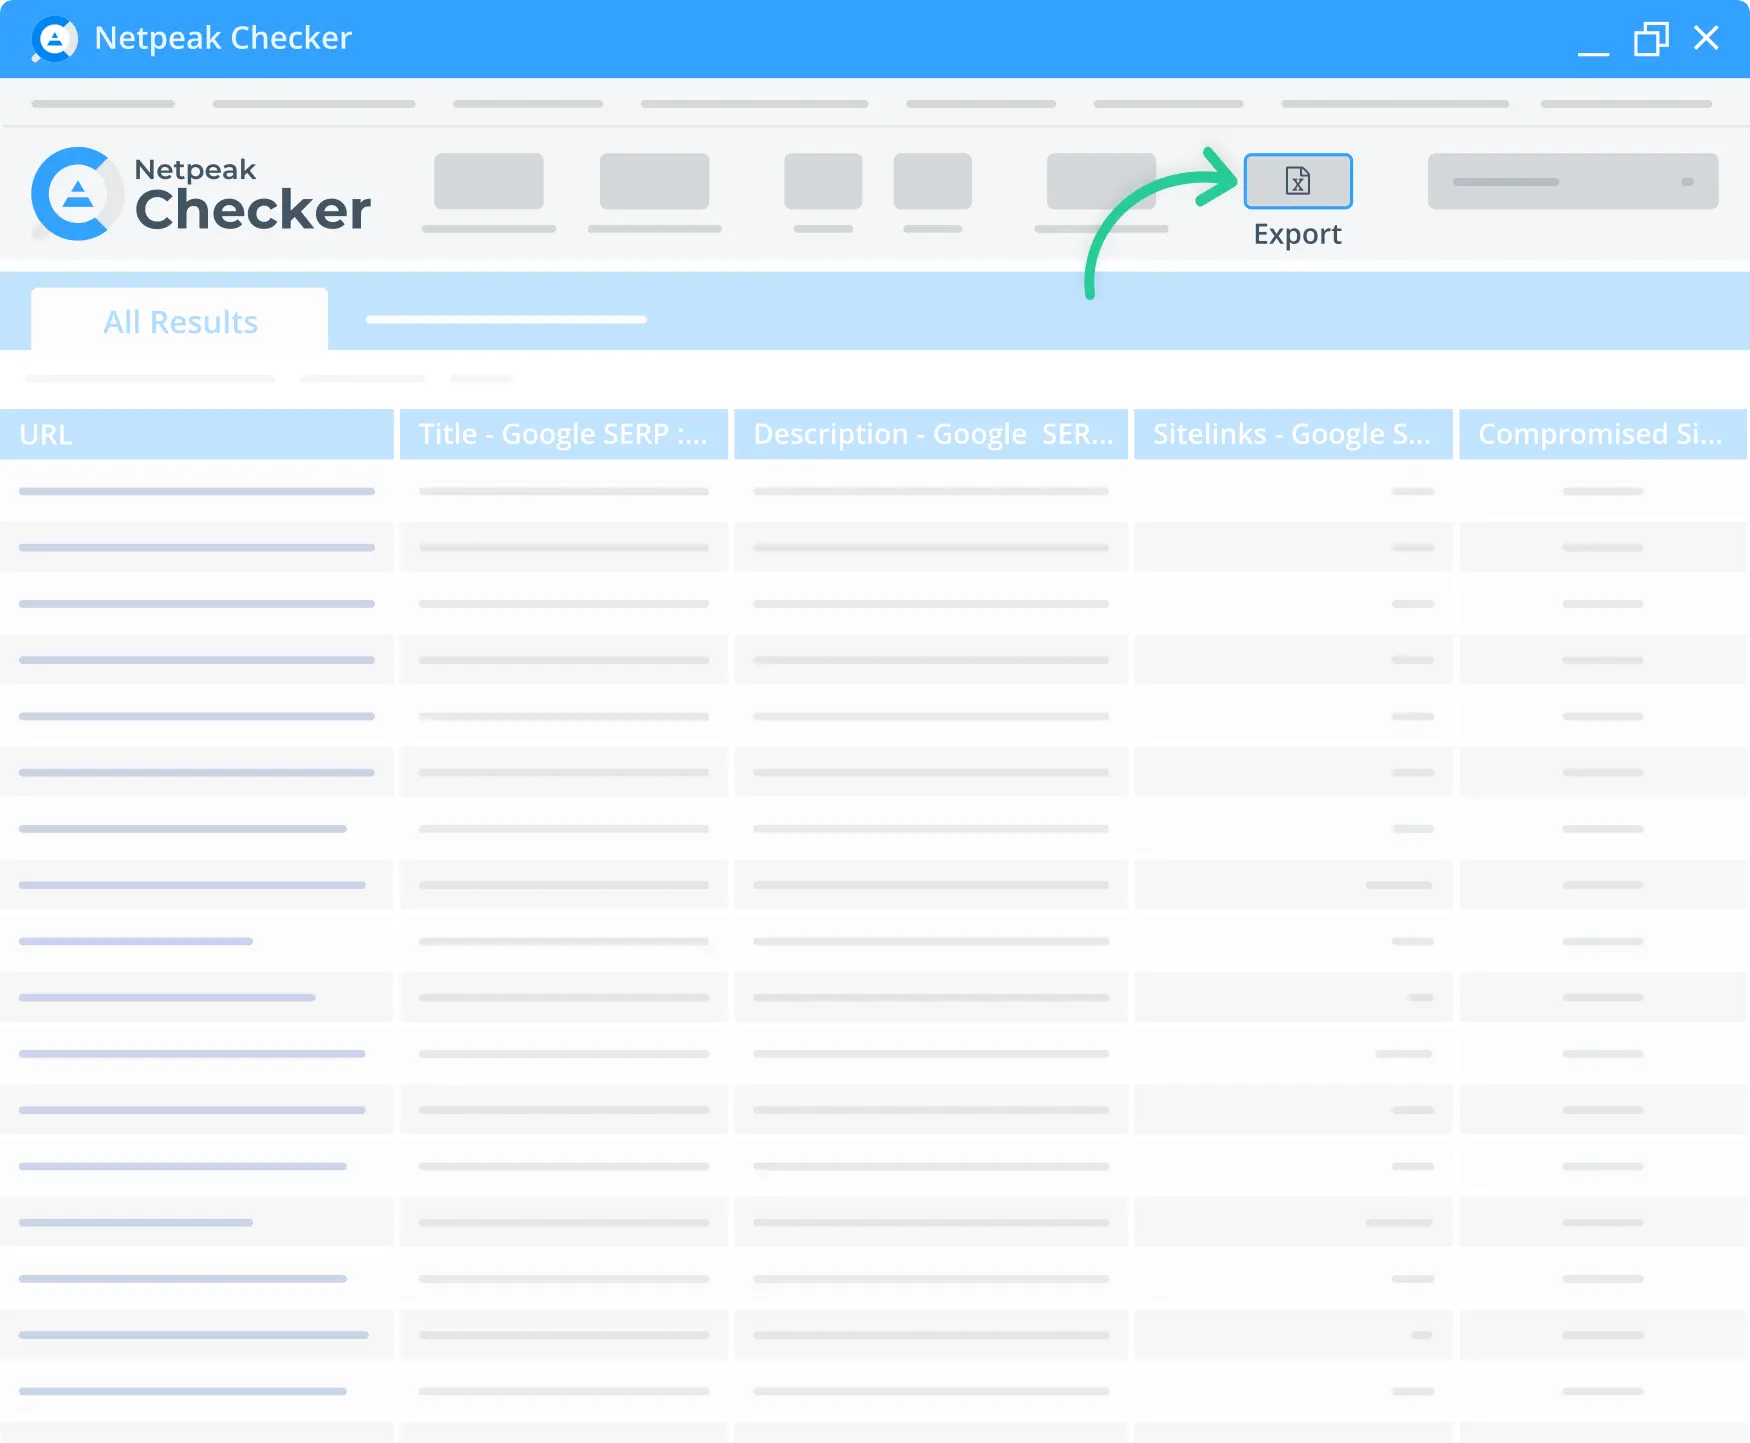 Netpeak Checker allows you to export data in just one click.